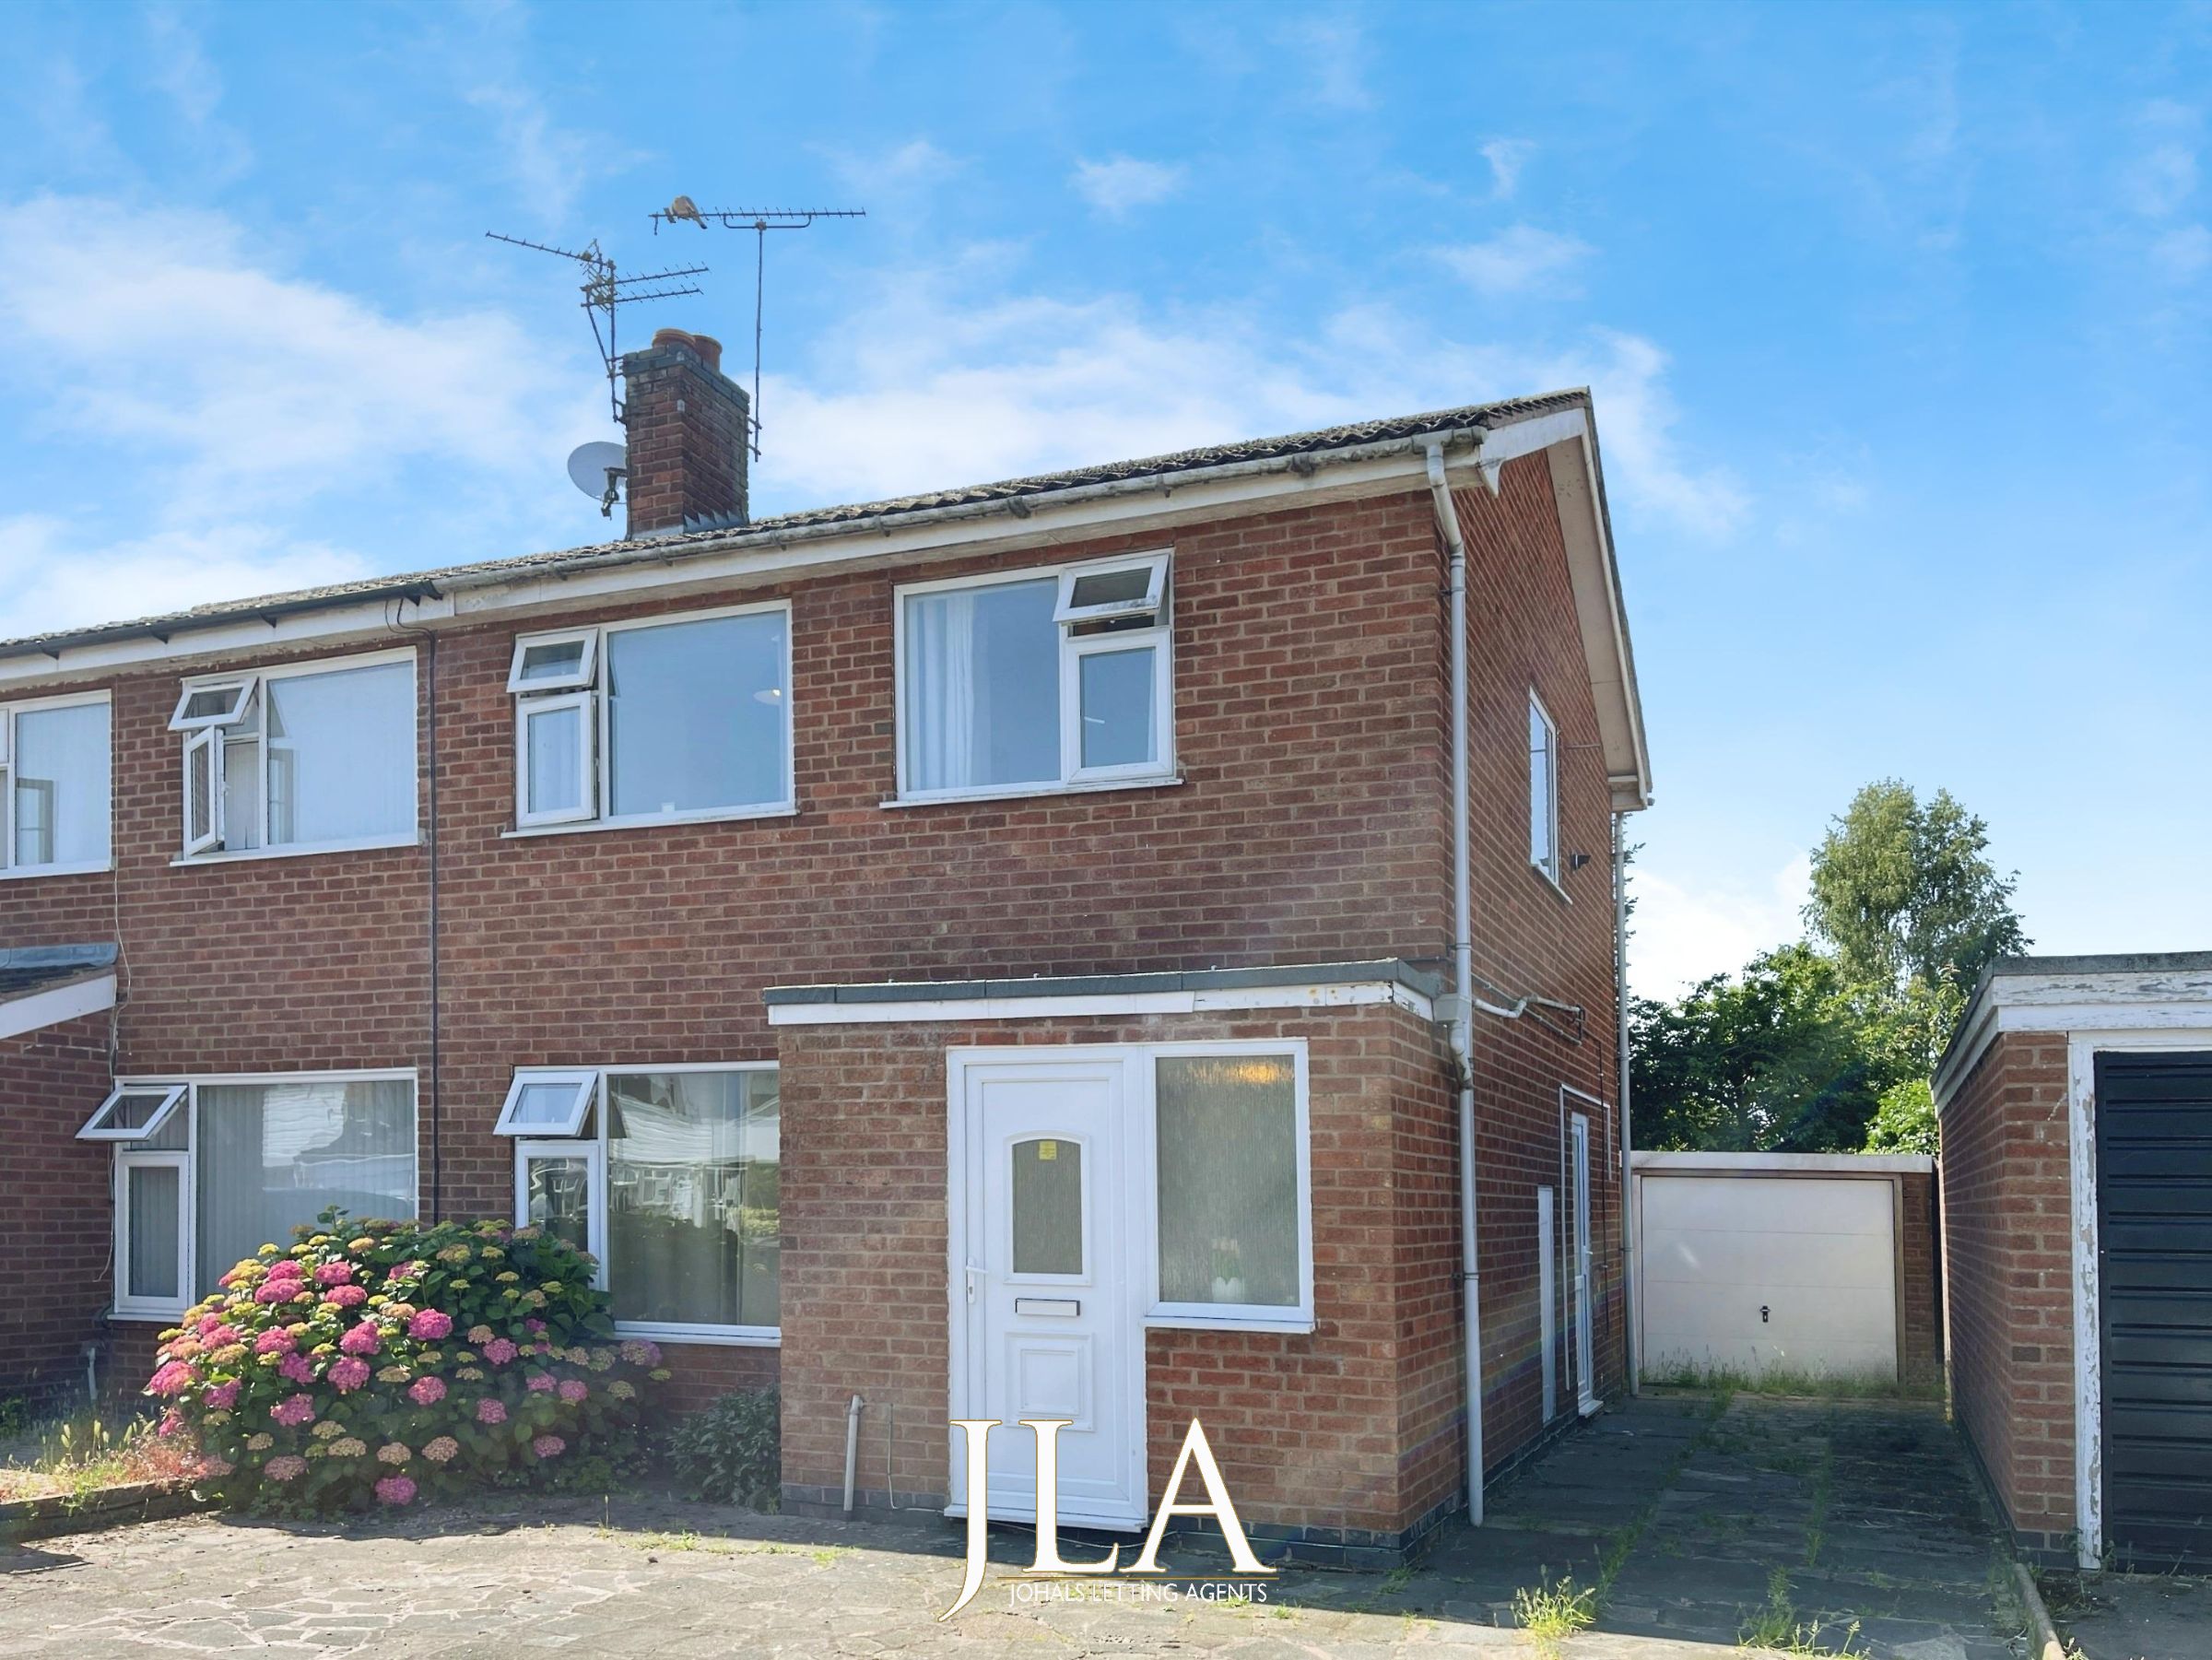 3 bed semi-detached house to rent in Windrush Drive, Leicester, LE2 